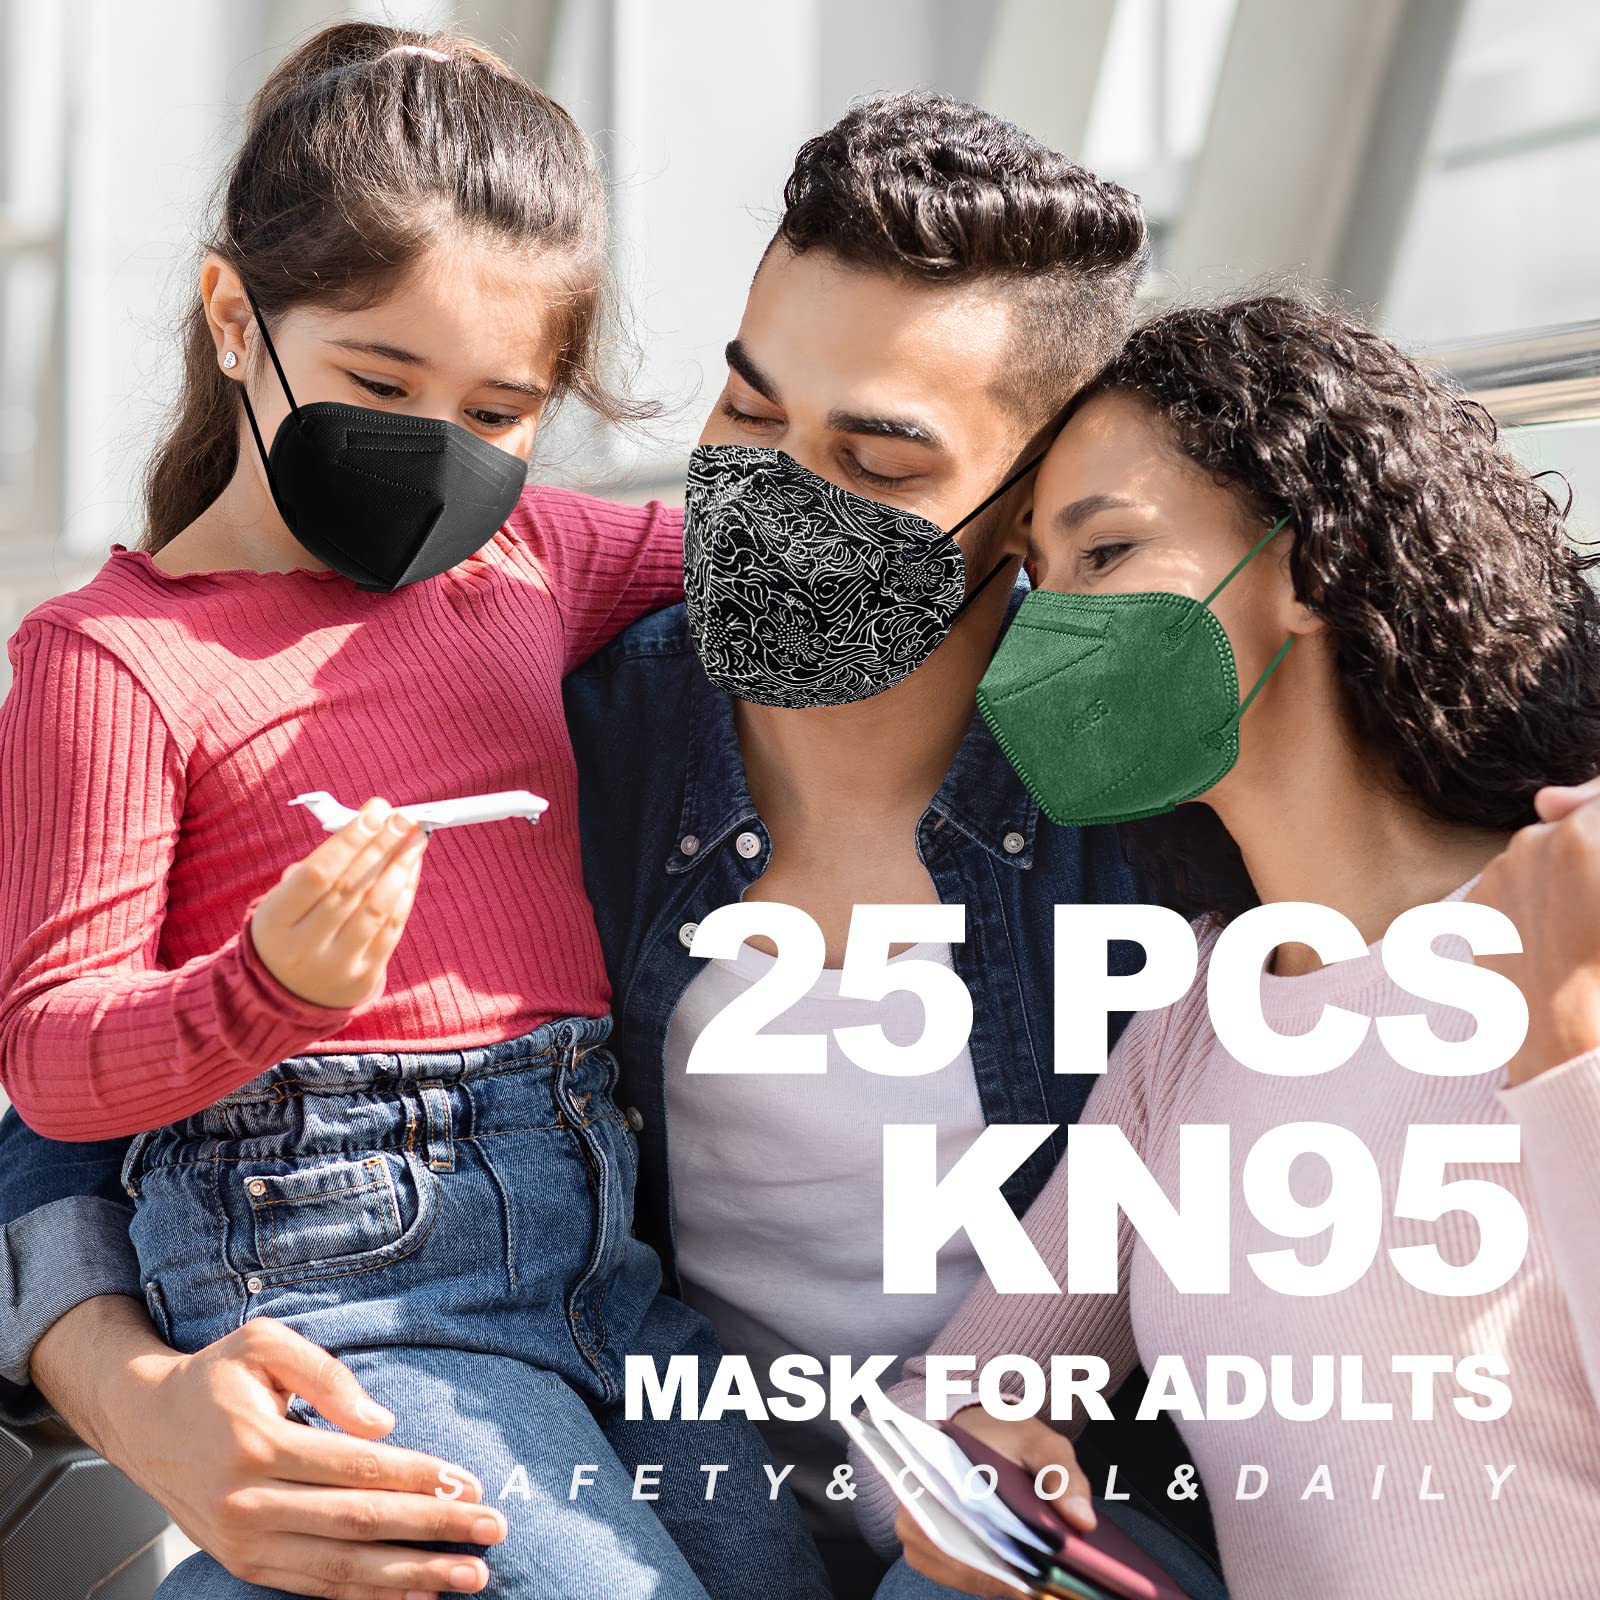 KN95 Face Masks, KN95 Mask, 25 Pack Individually Wrapped KN95 Face Masks, 5 layer Colorful KN95 Masks with Designs for Adults Women Men Teen Workout Outdoor